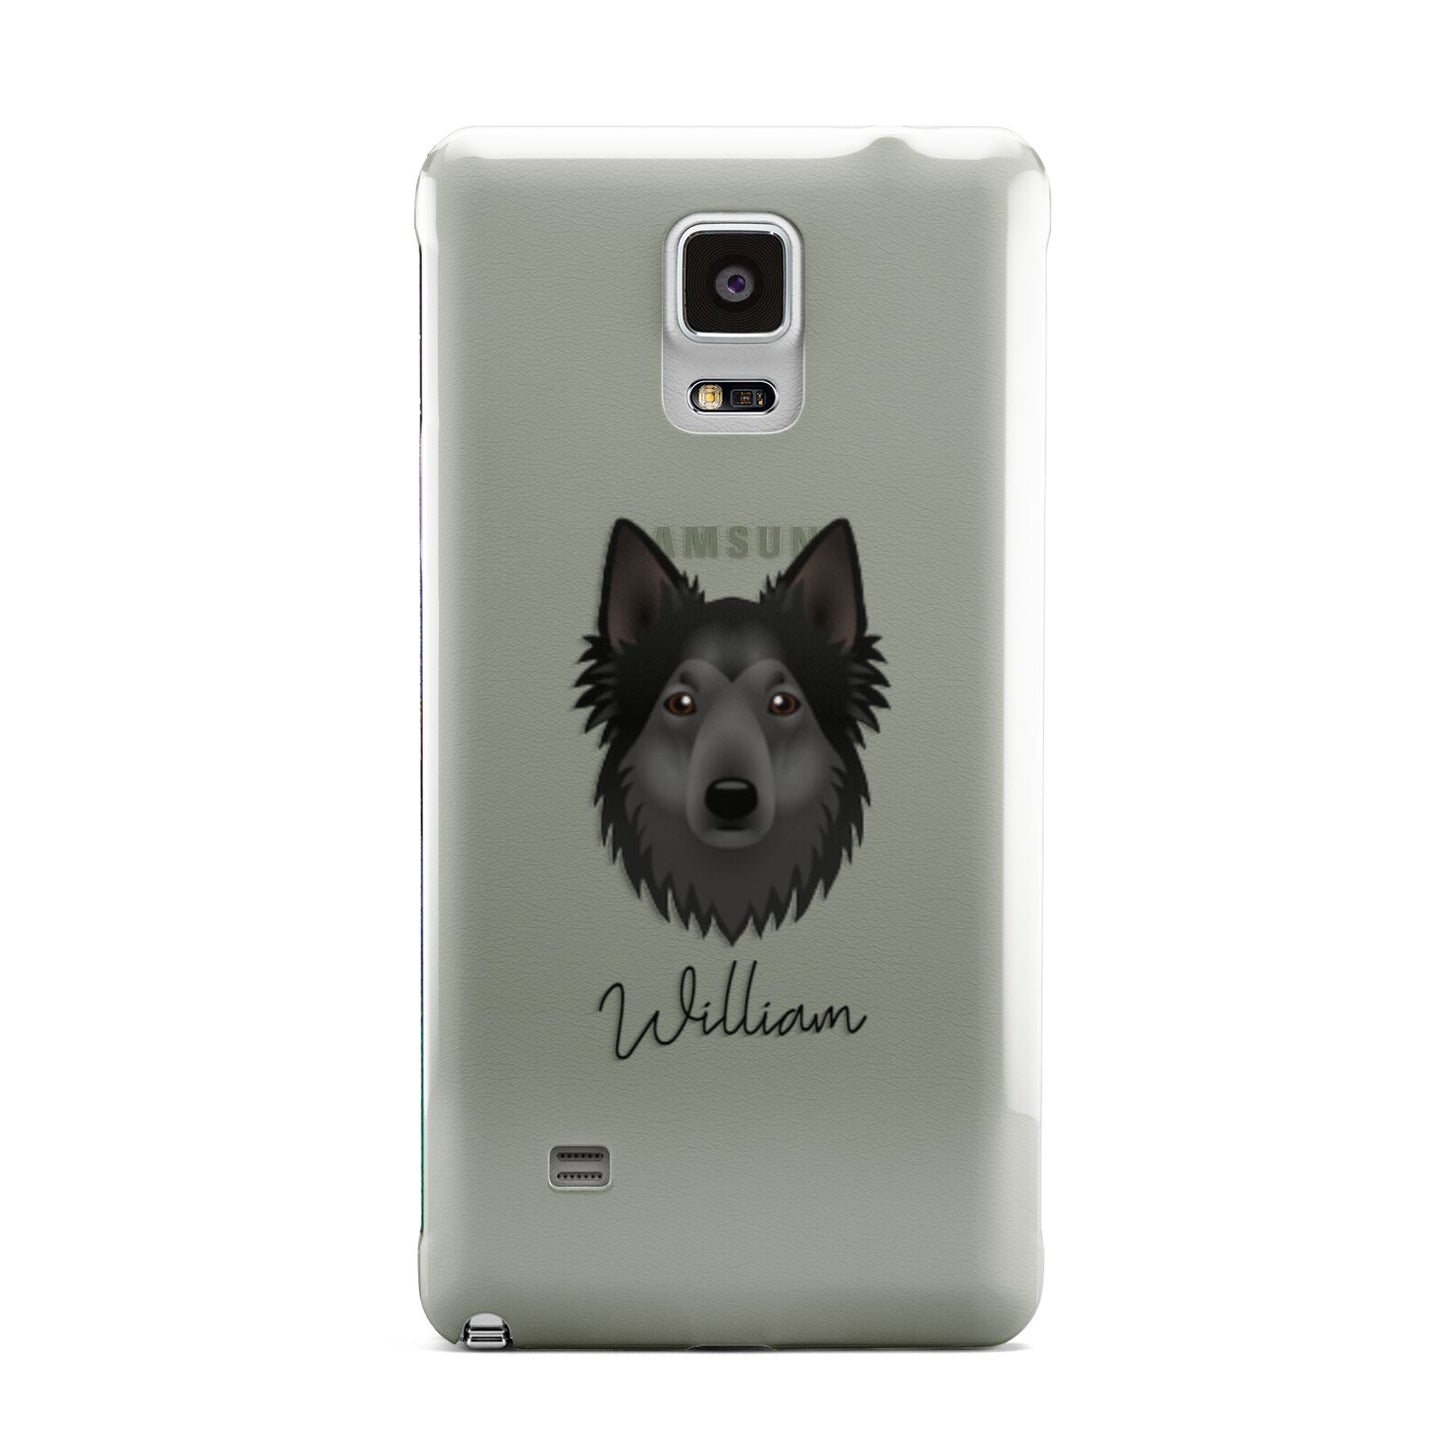 Shollie Personalised Samsung Galaxy Note 4 Case